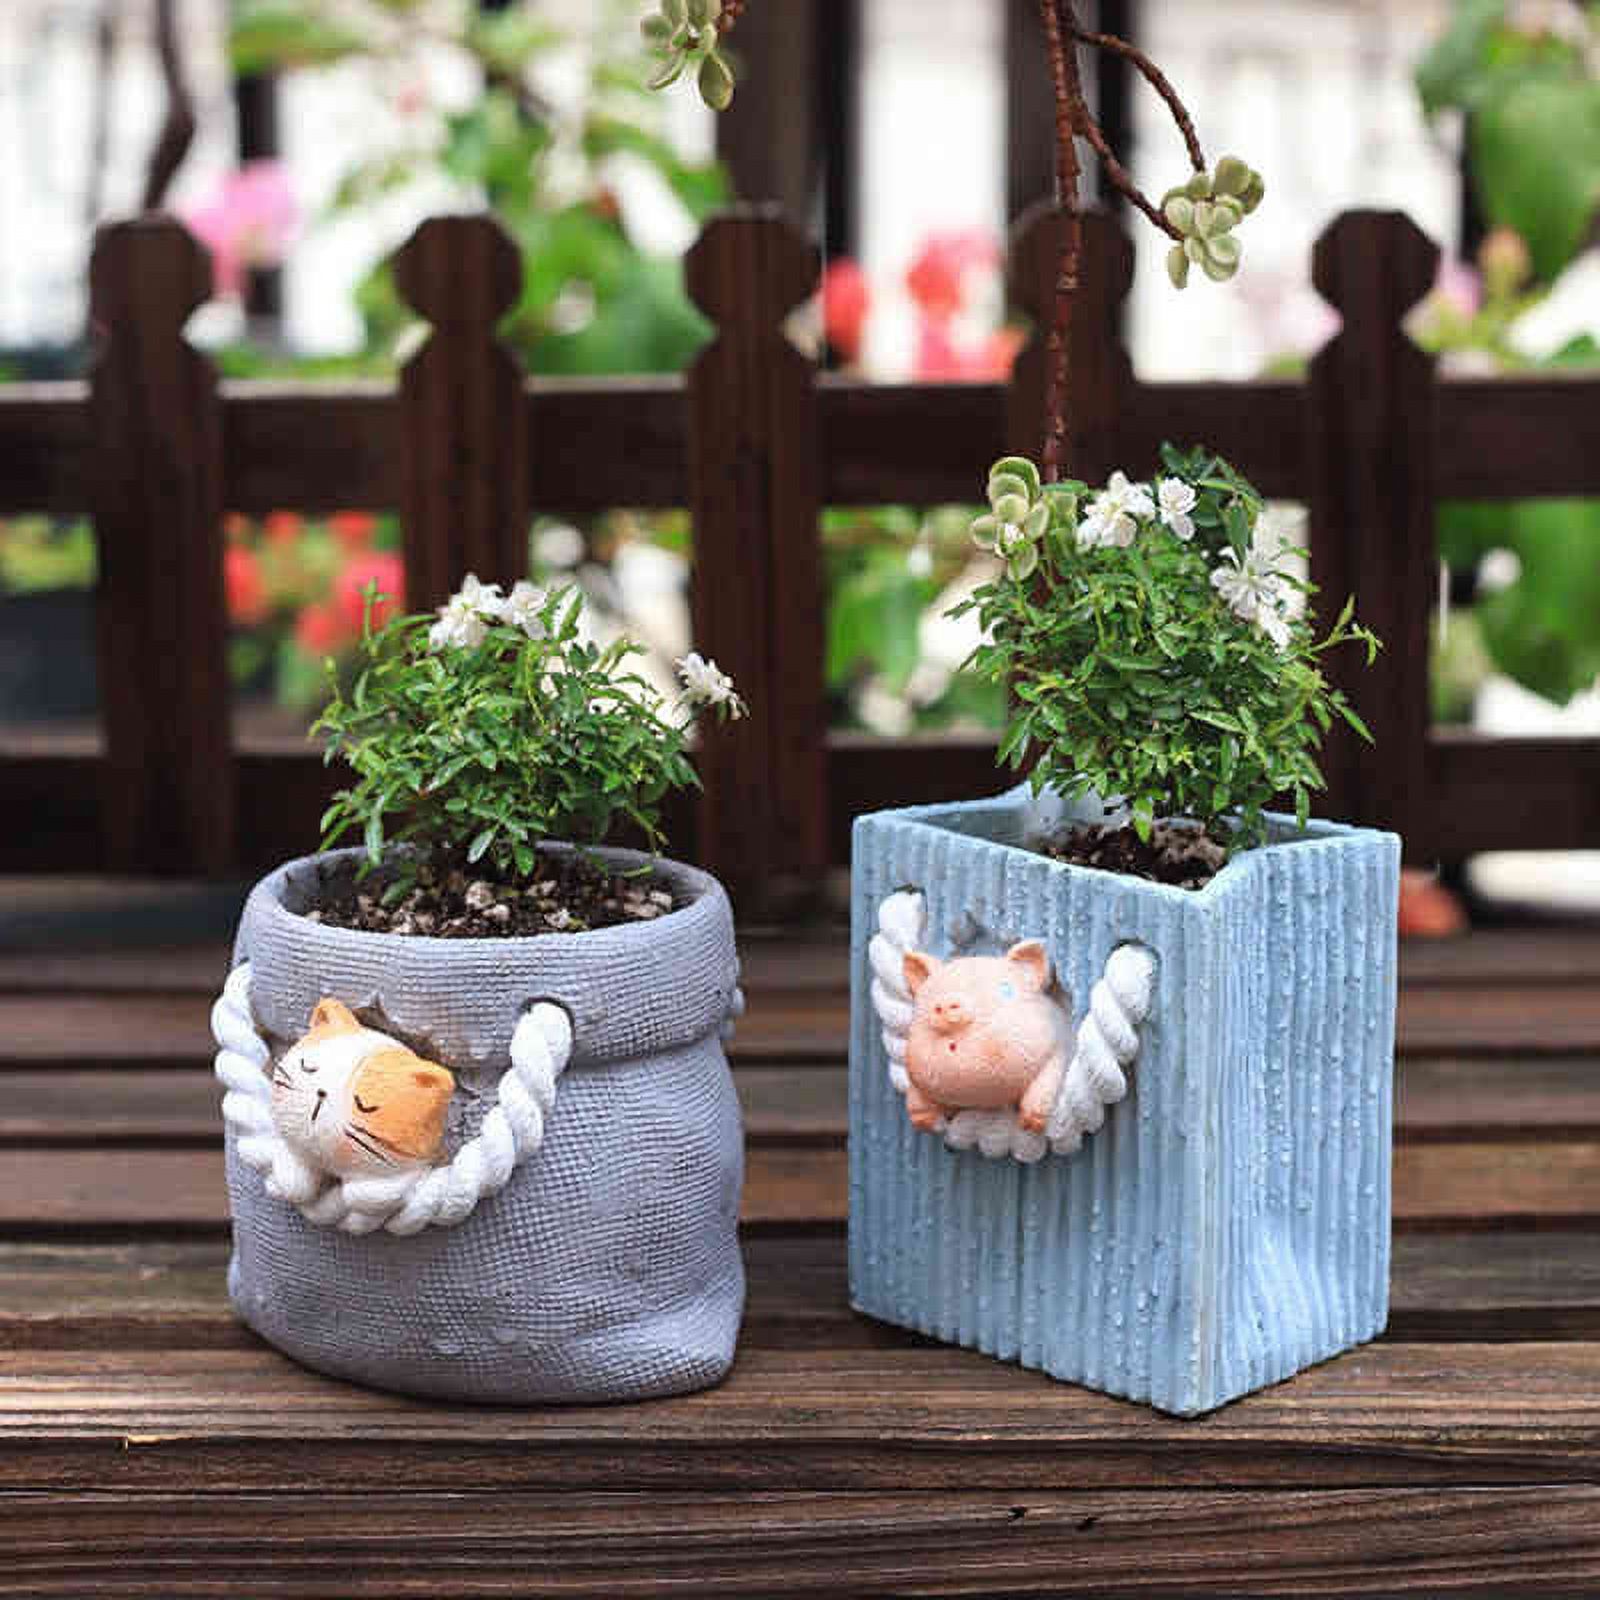 Cute Animal Plant Pots,Resin Flower Pots Outdoor Garden Planters with Drain Holes 4 inch Indoor Small Plant Pots for Family Woman Wife Mother Gift - image 5 of 6